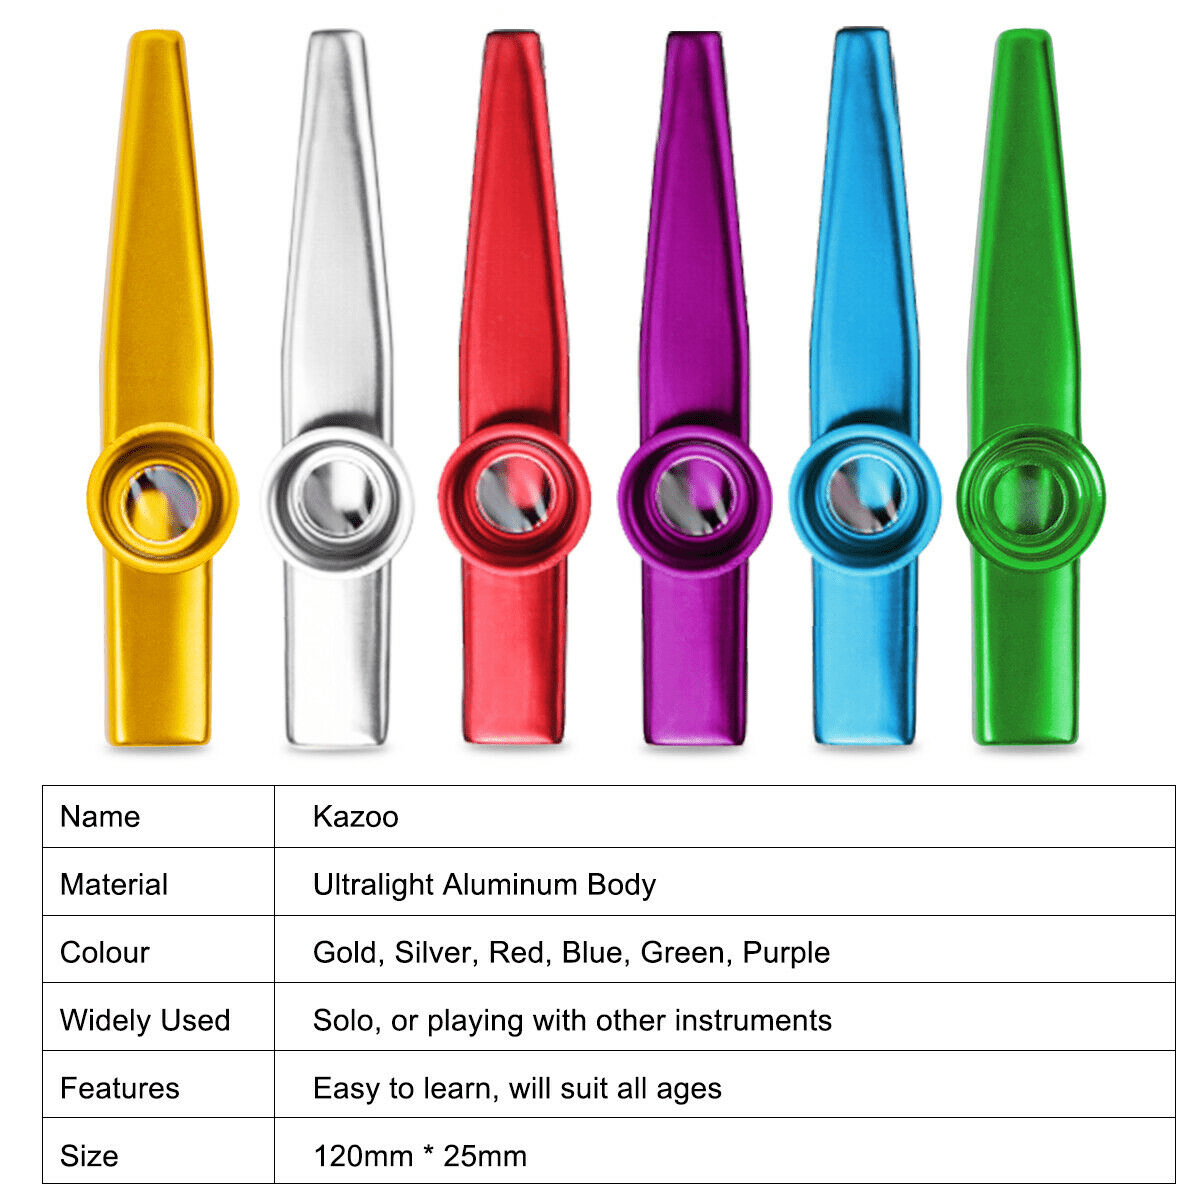 Portable Metal Kazoo For Beginners And Flute Music Lovers Lightweight  Woodwind Instrument With Simple Design From Instrument0316, $0.43